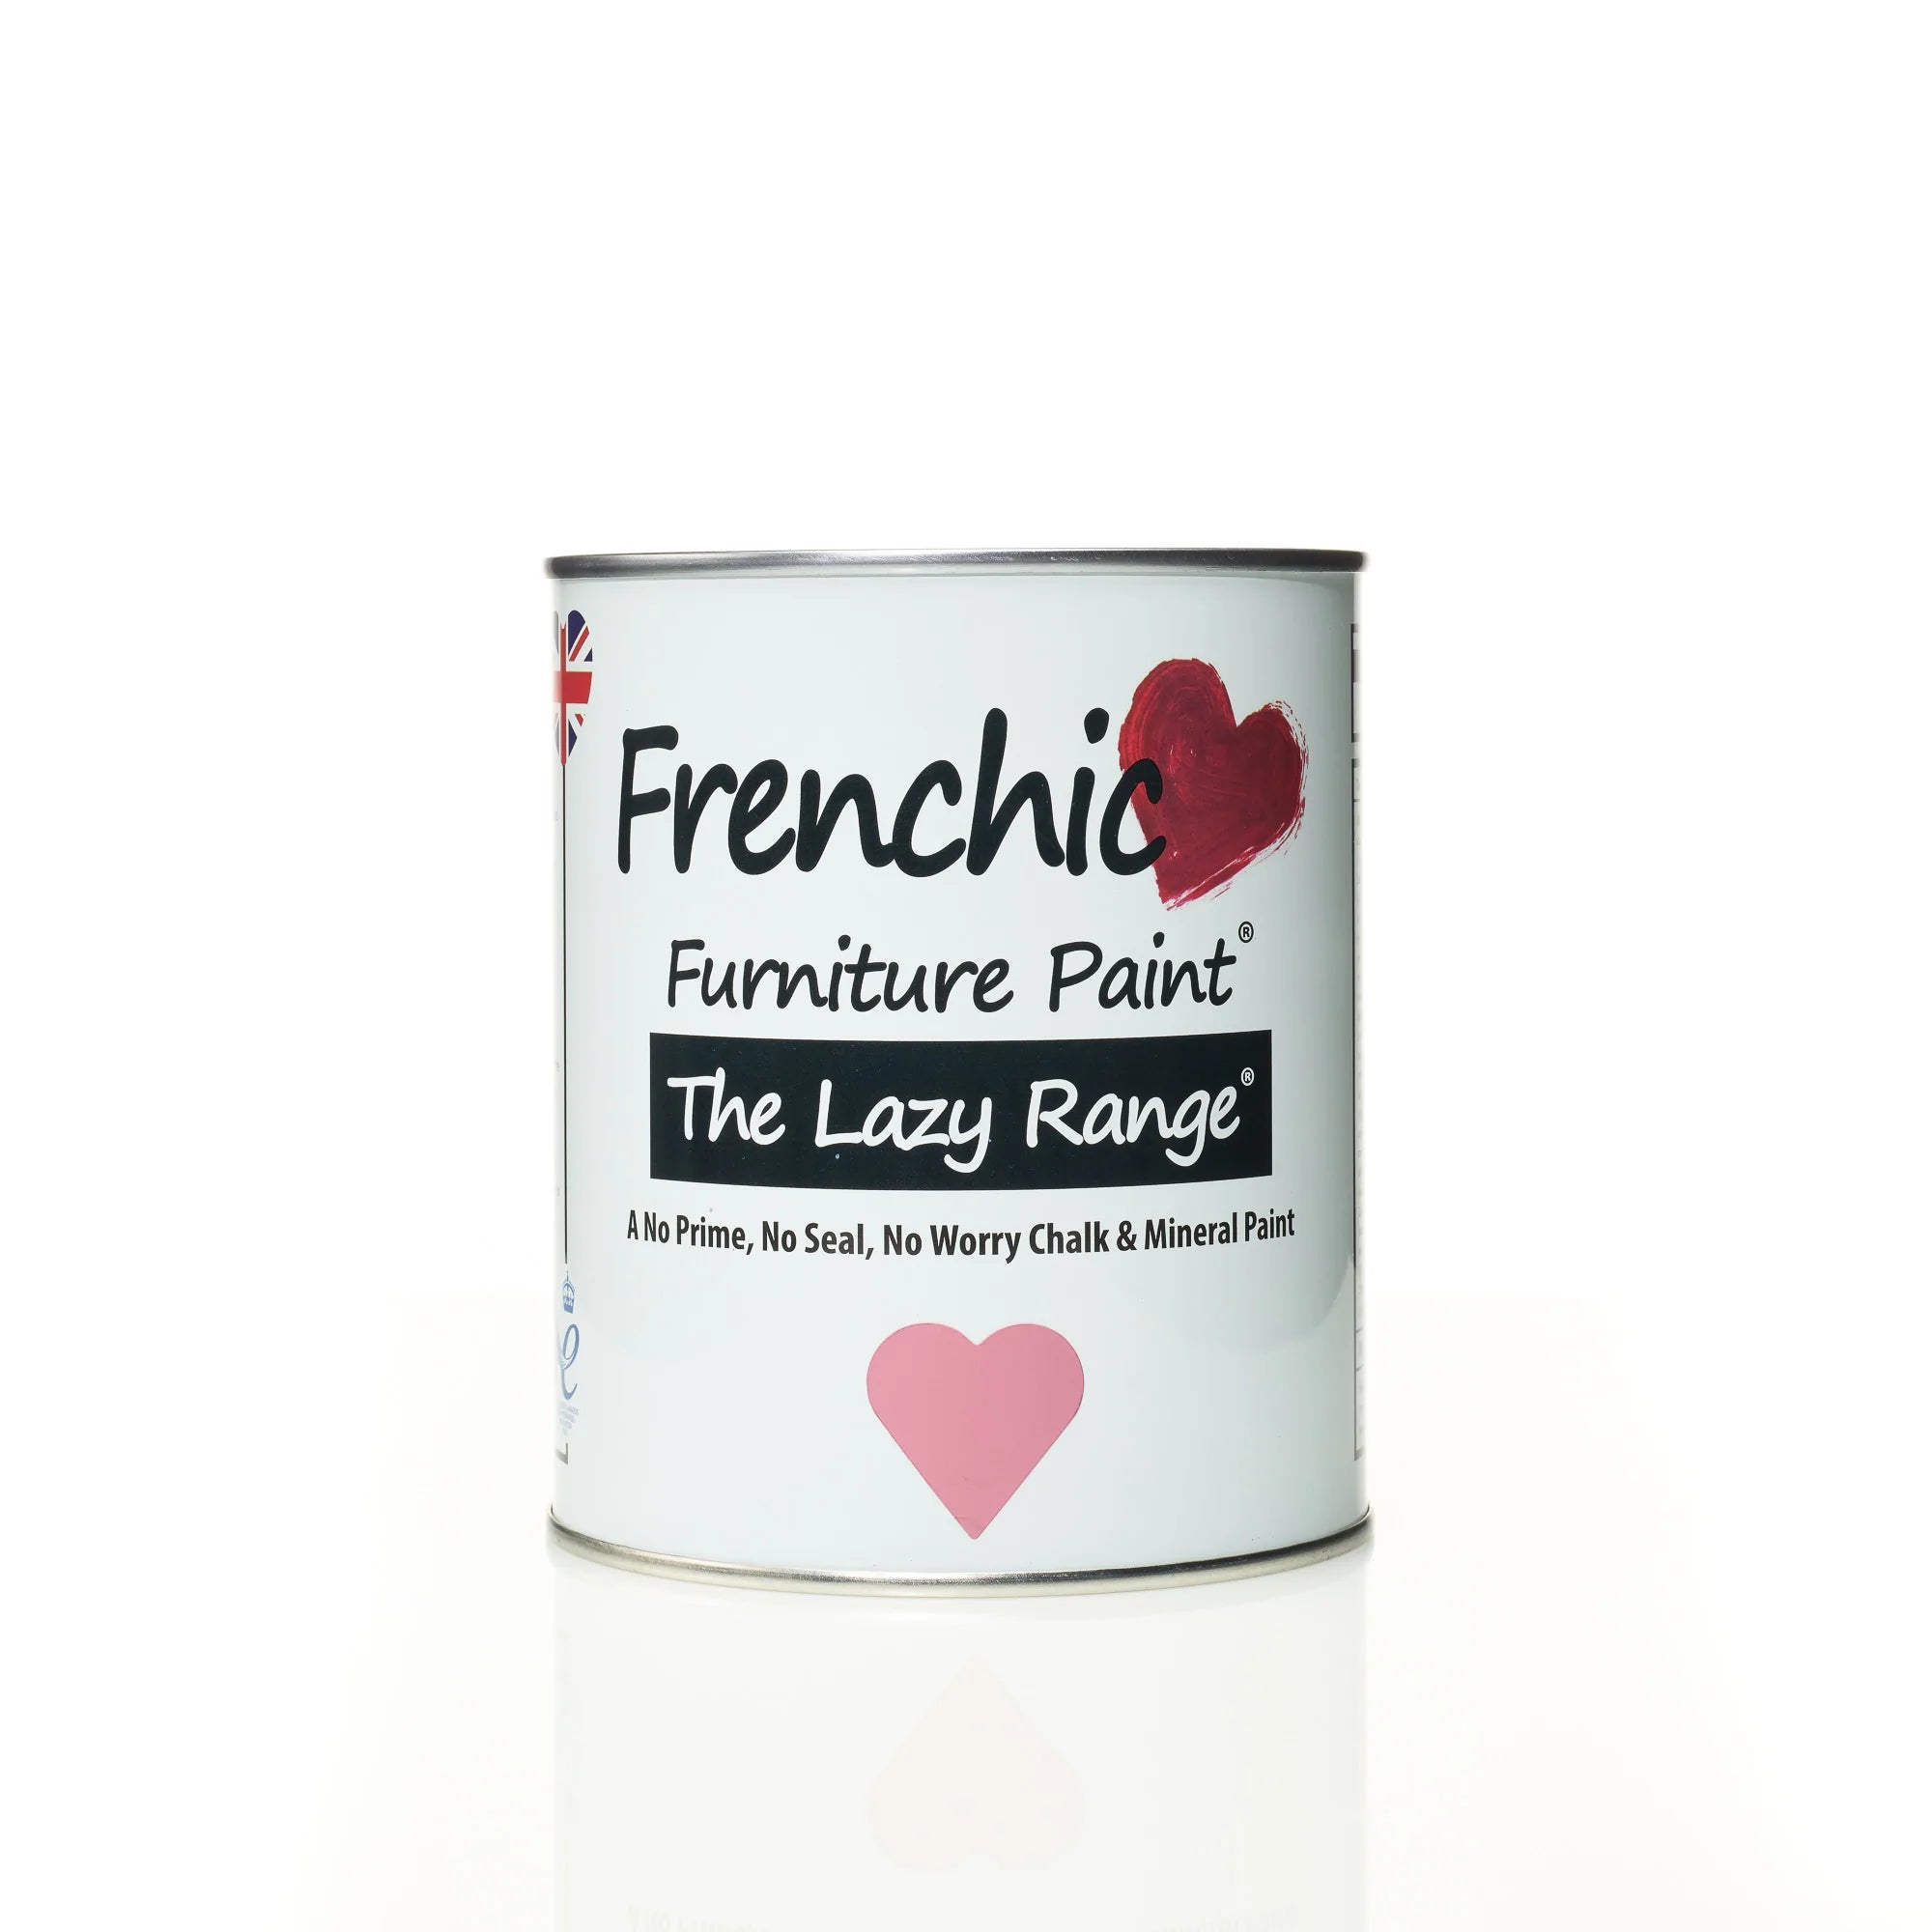 Frenchic Paint | Lazy Range - Love Letter by Weirs of Baggot St